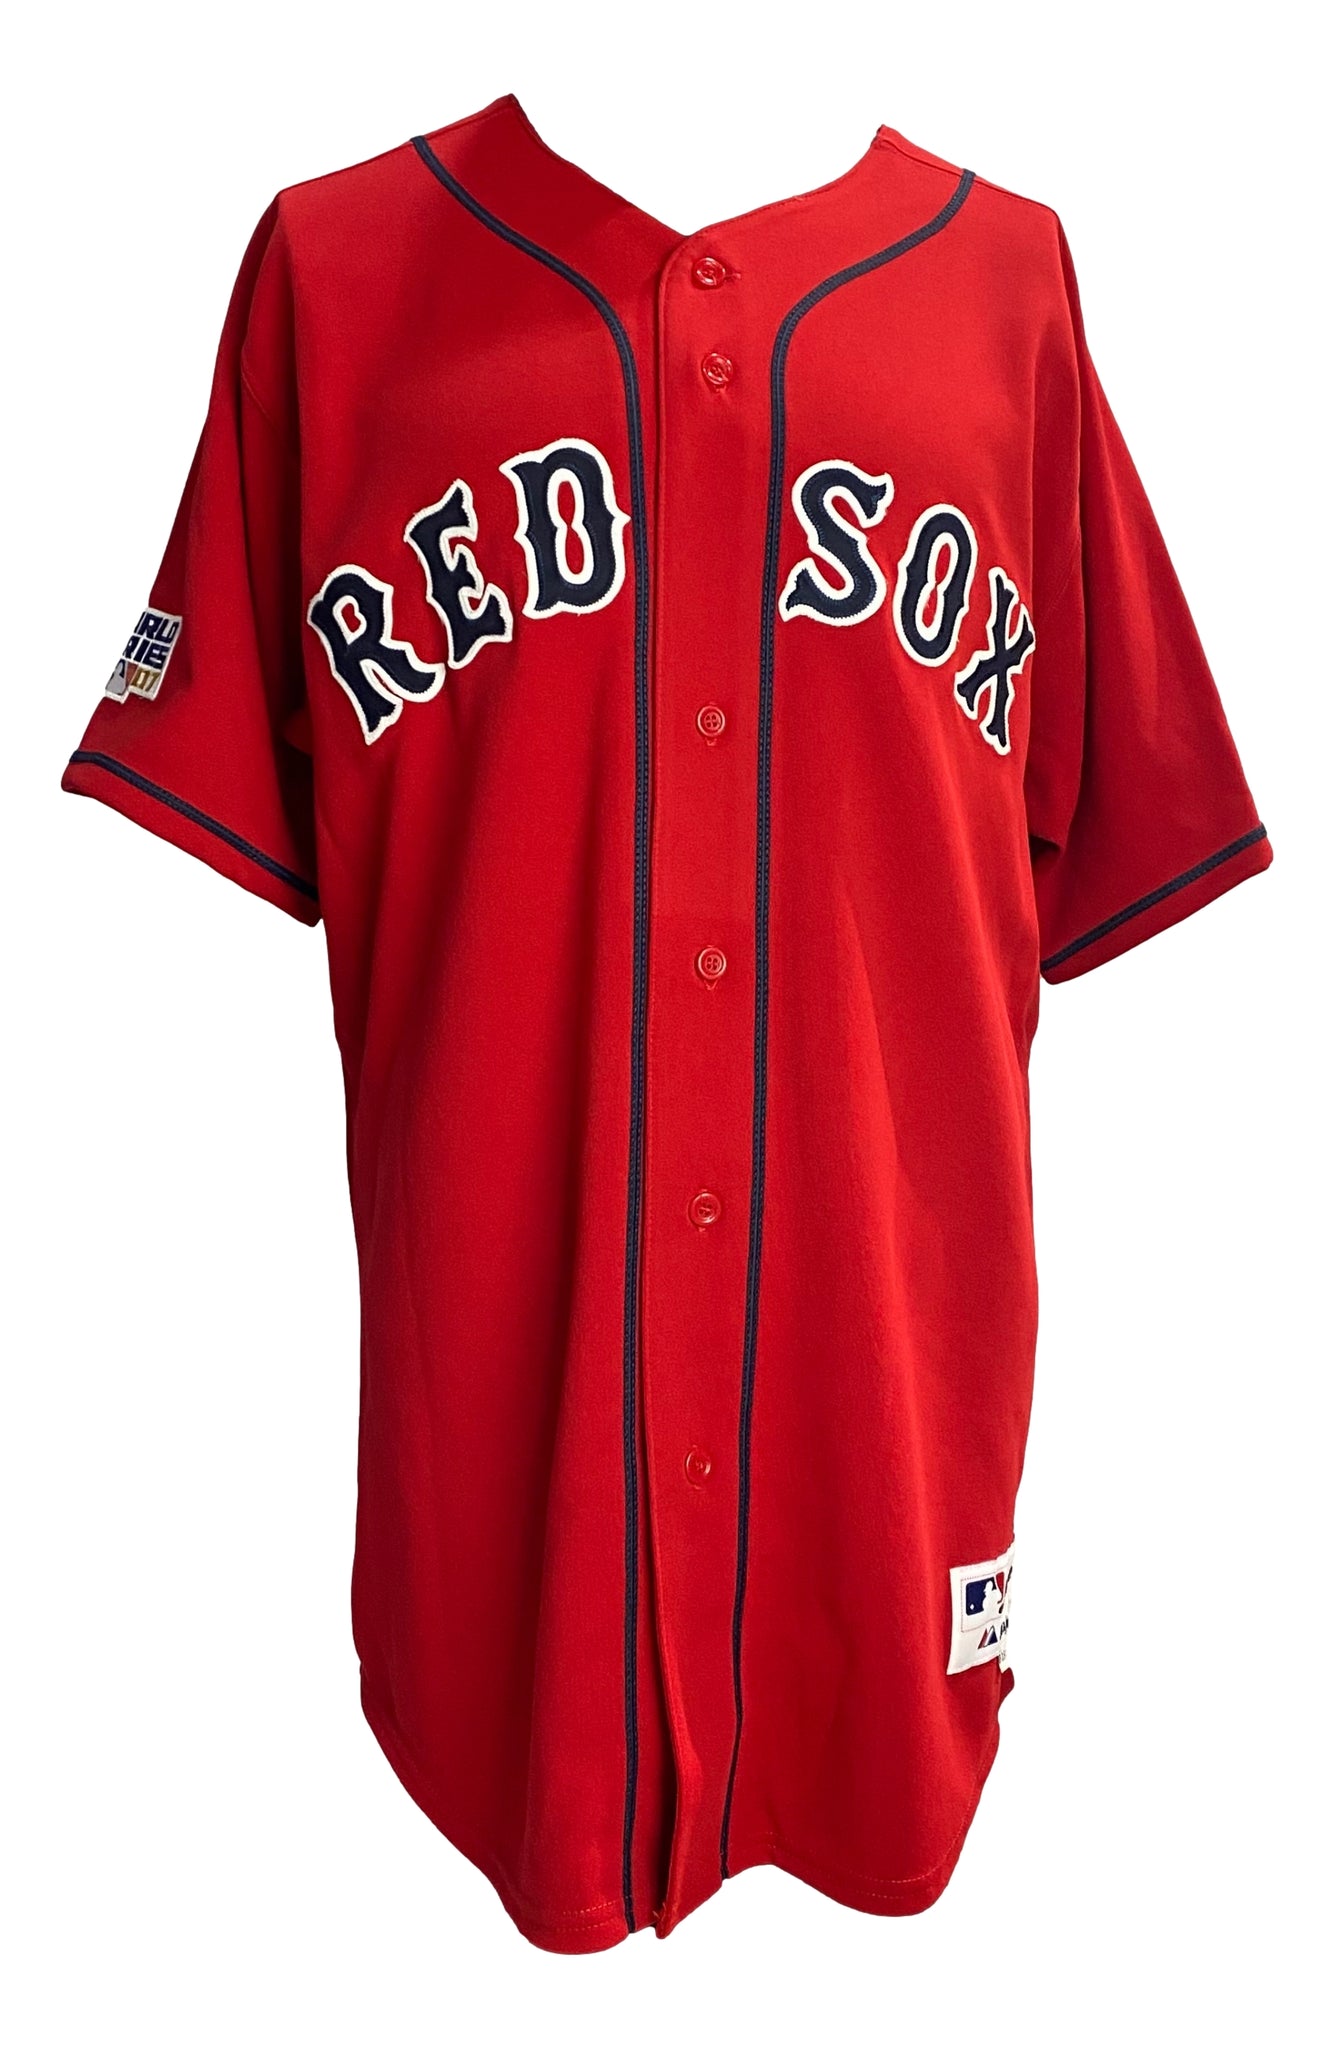 David Ortiz Signed Red Sox Majestic Authentic 2007 World Series Jersey –  Sports Integrity